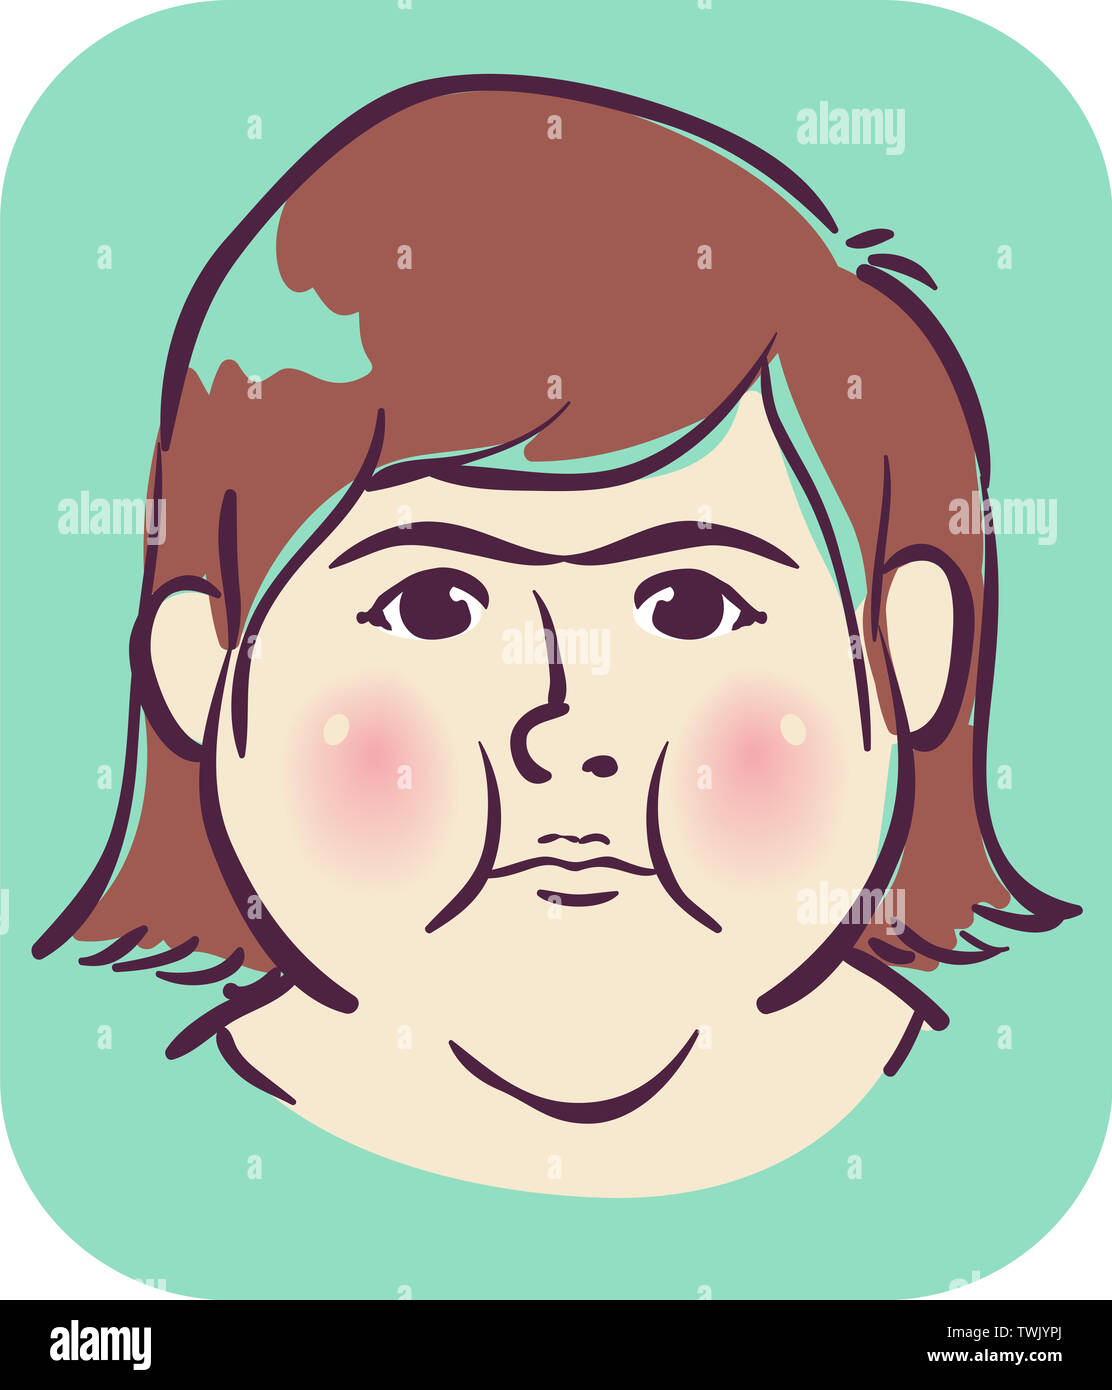 Illustration of a Girl with Red, Puffy and Round Face Stock Photo